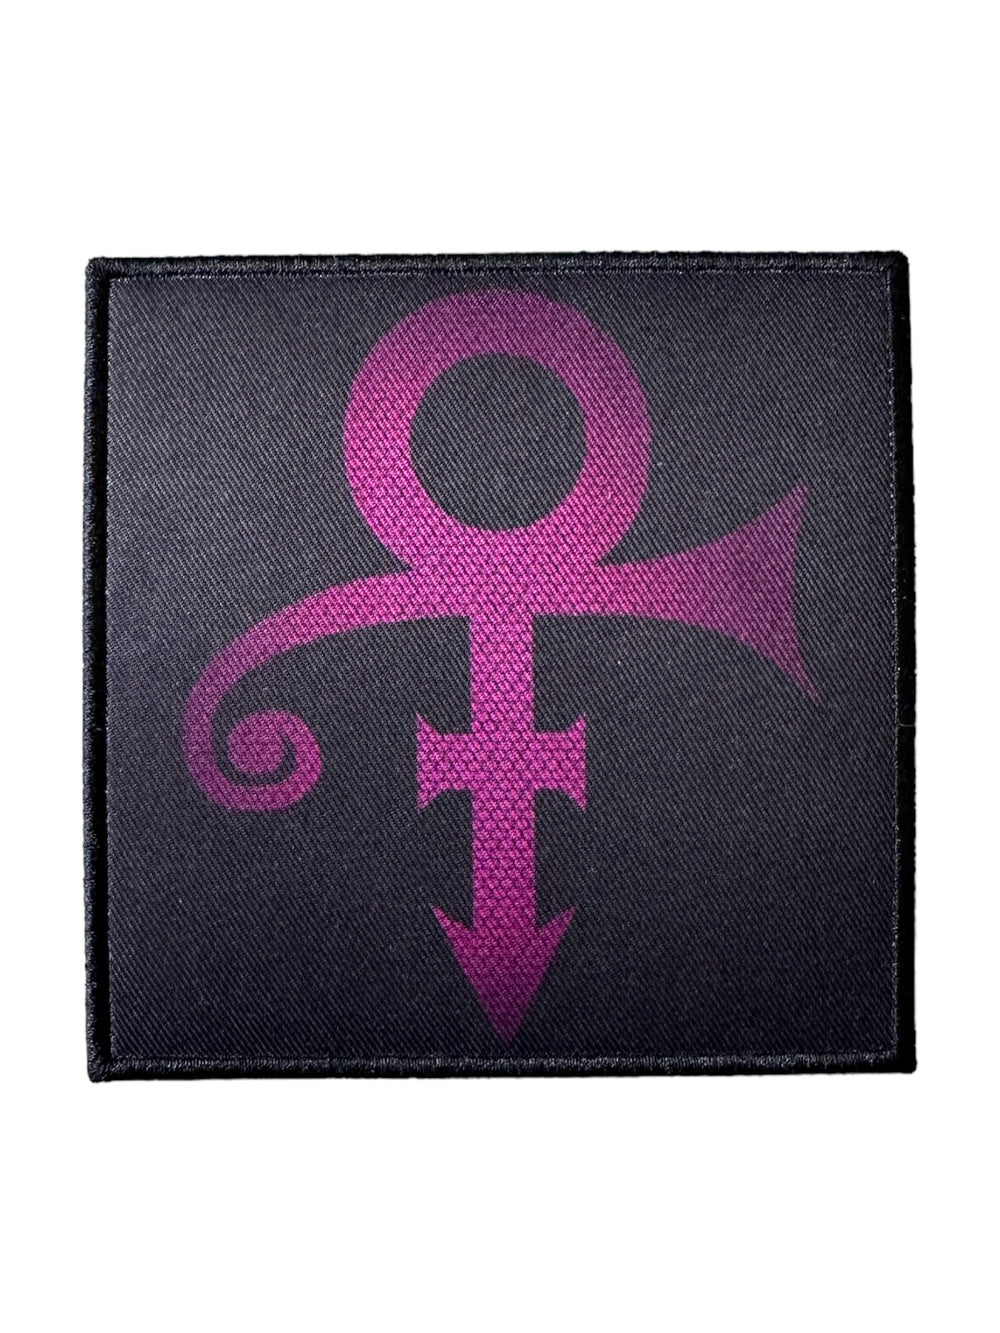 Prince - 0(+> Official Love Symbol Printed Patch Brand New